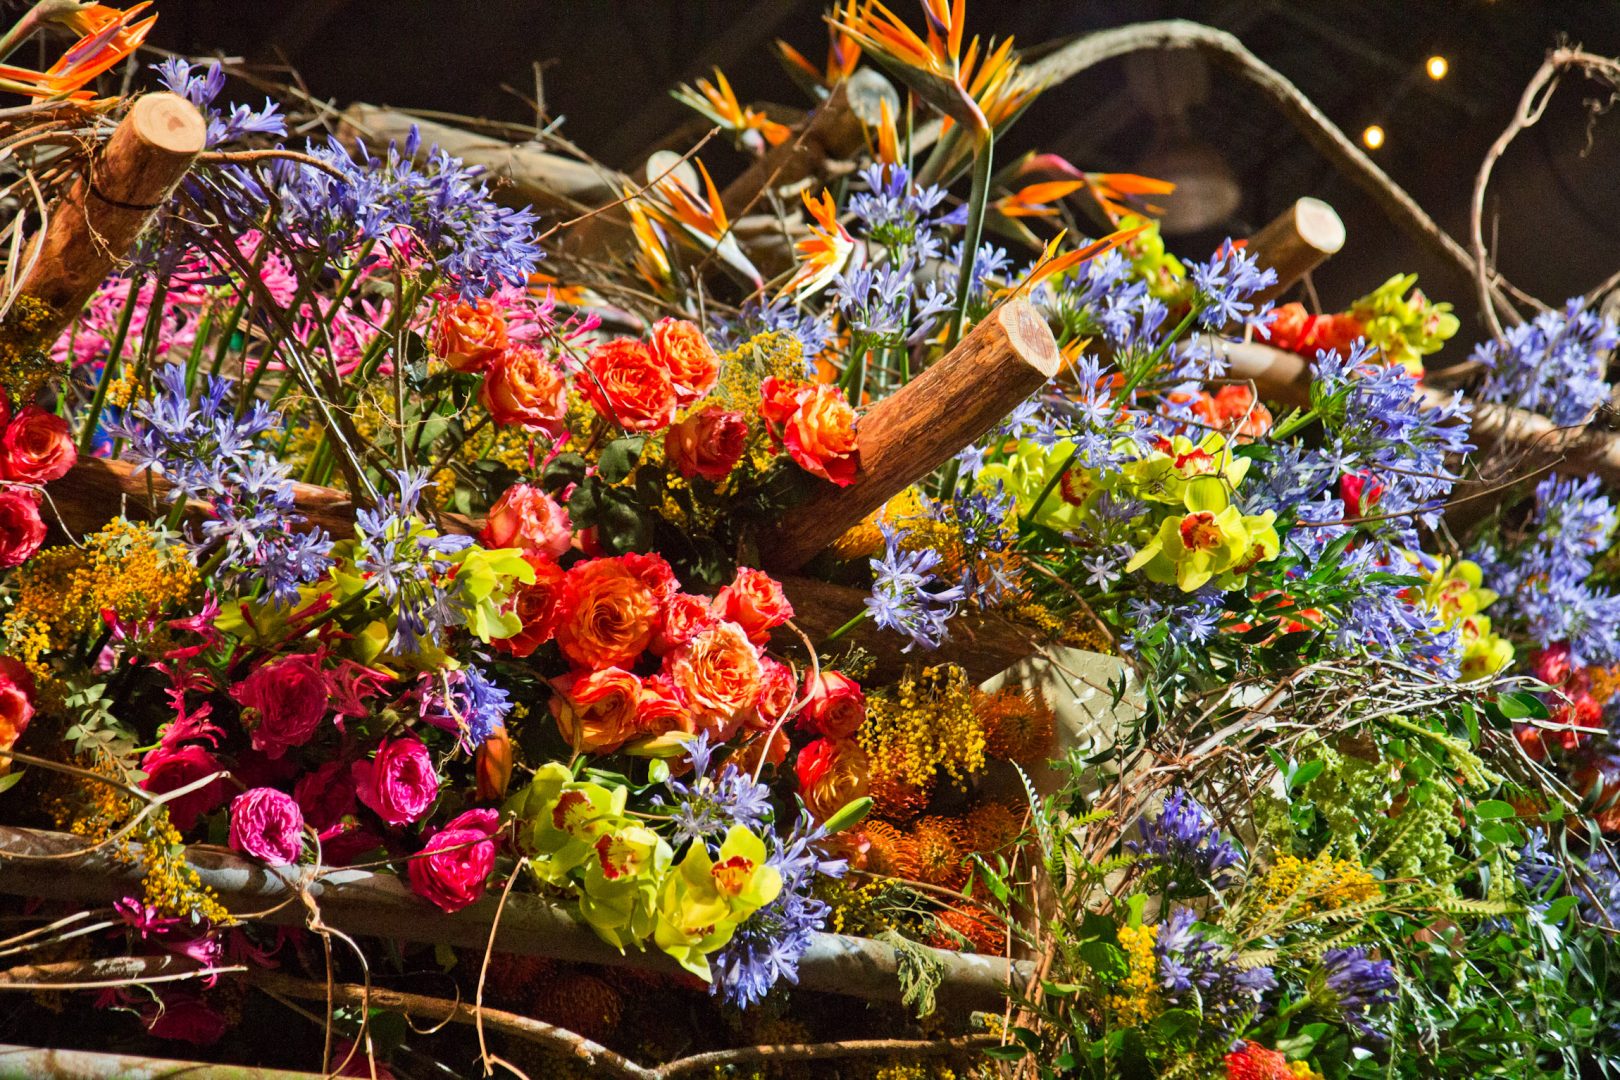 Flowers atop the main exhibit of the 2020 Philadelphia Flower Show, themed “Rivera Holiday.”